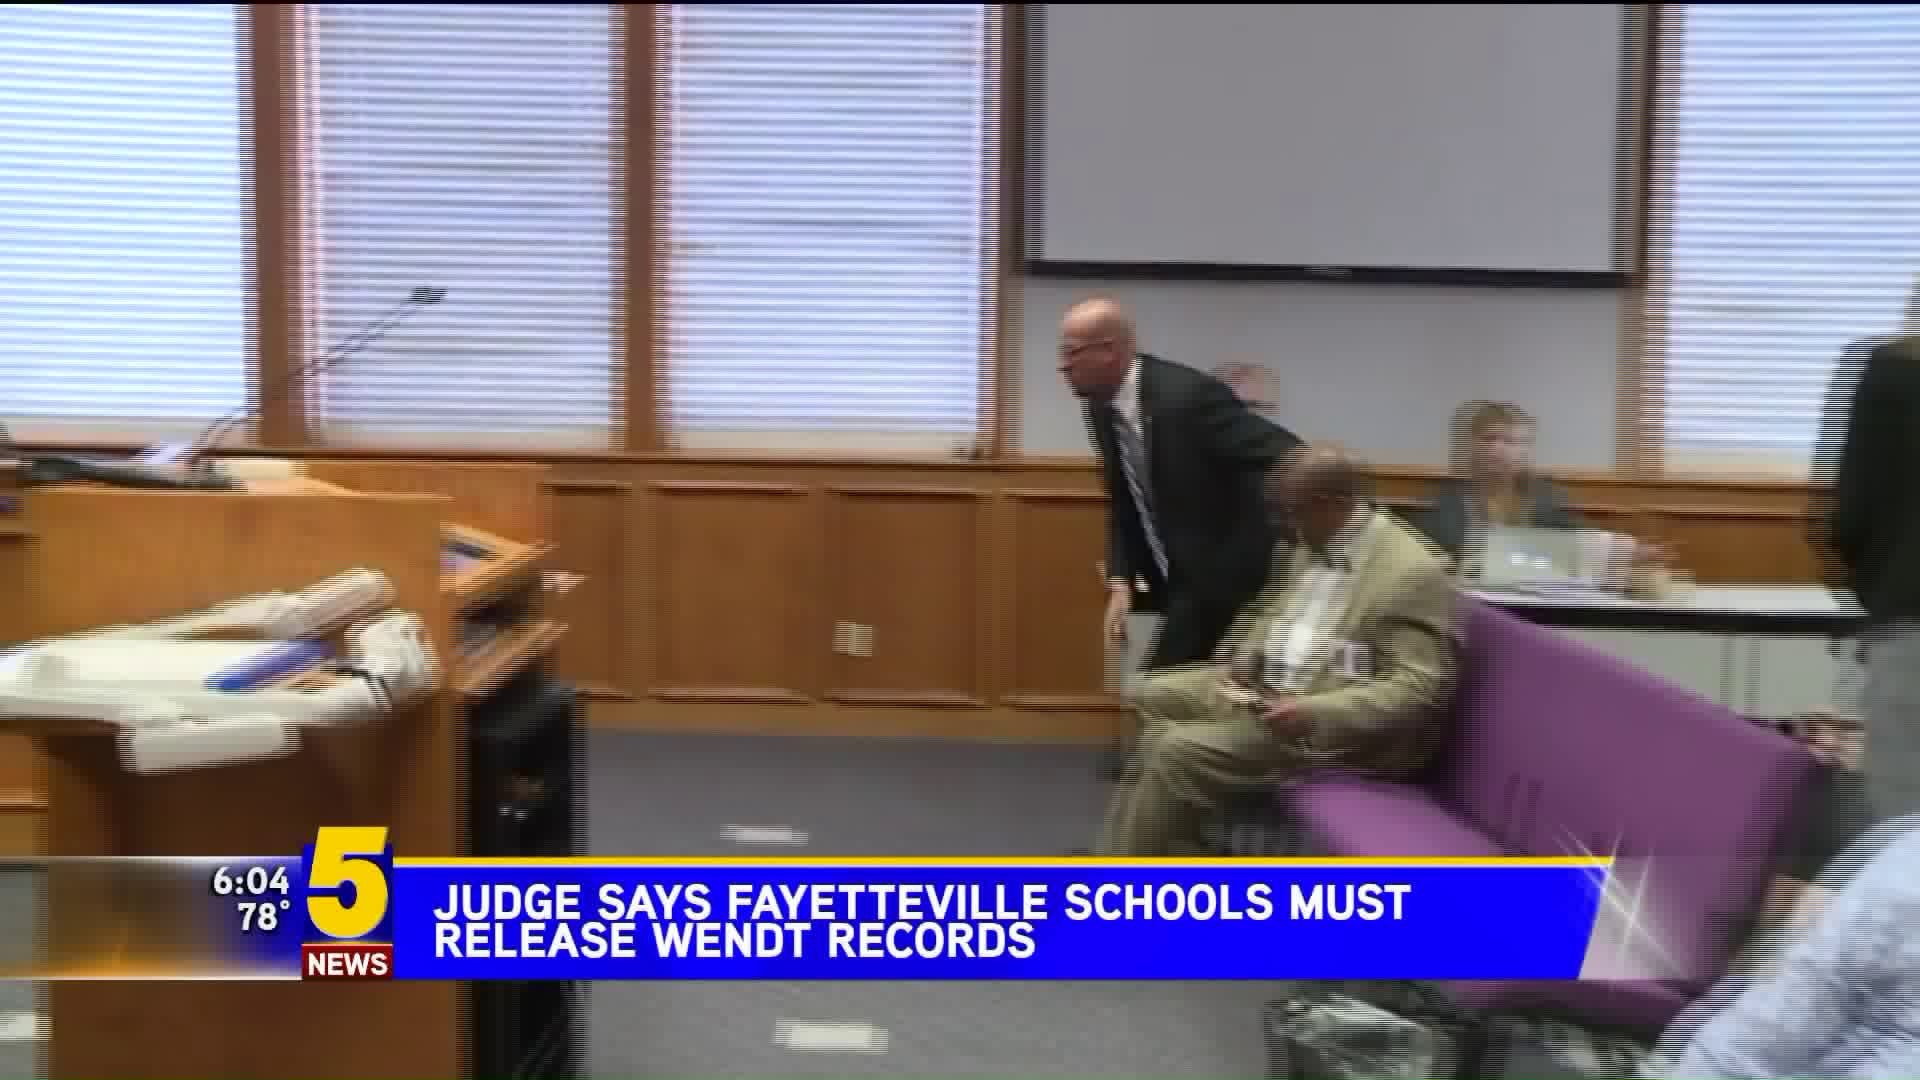 Judge Says Fayetteville Schools Must Release Wendt Records